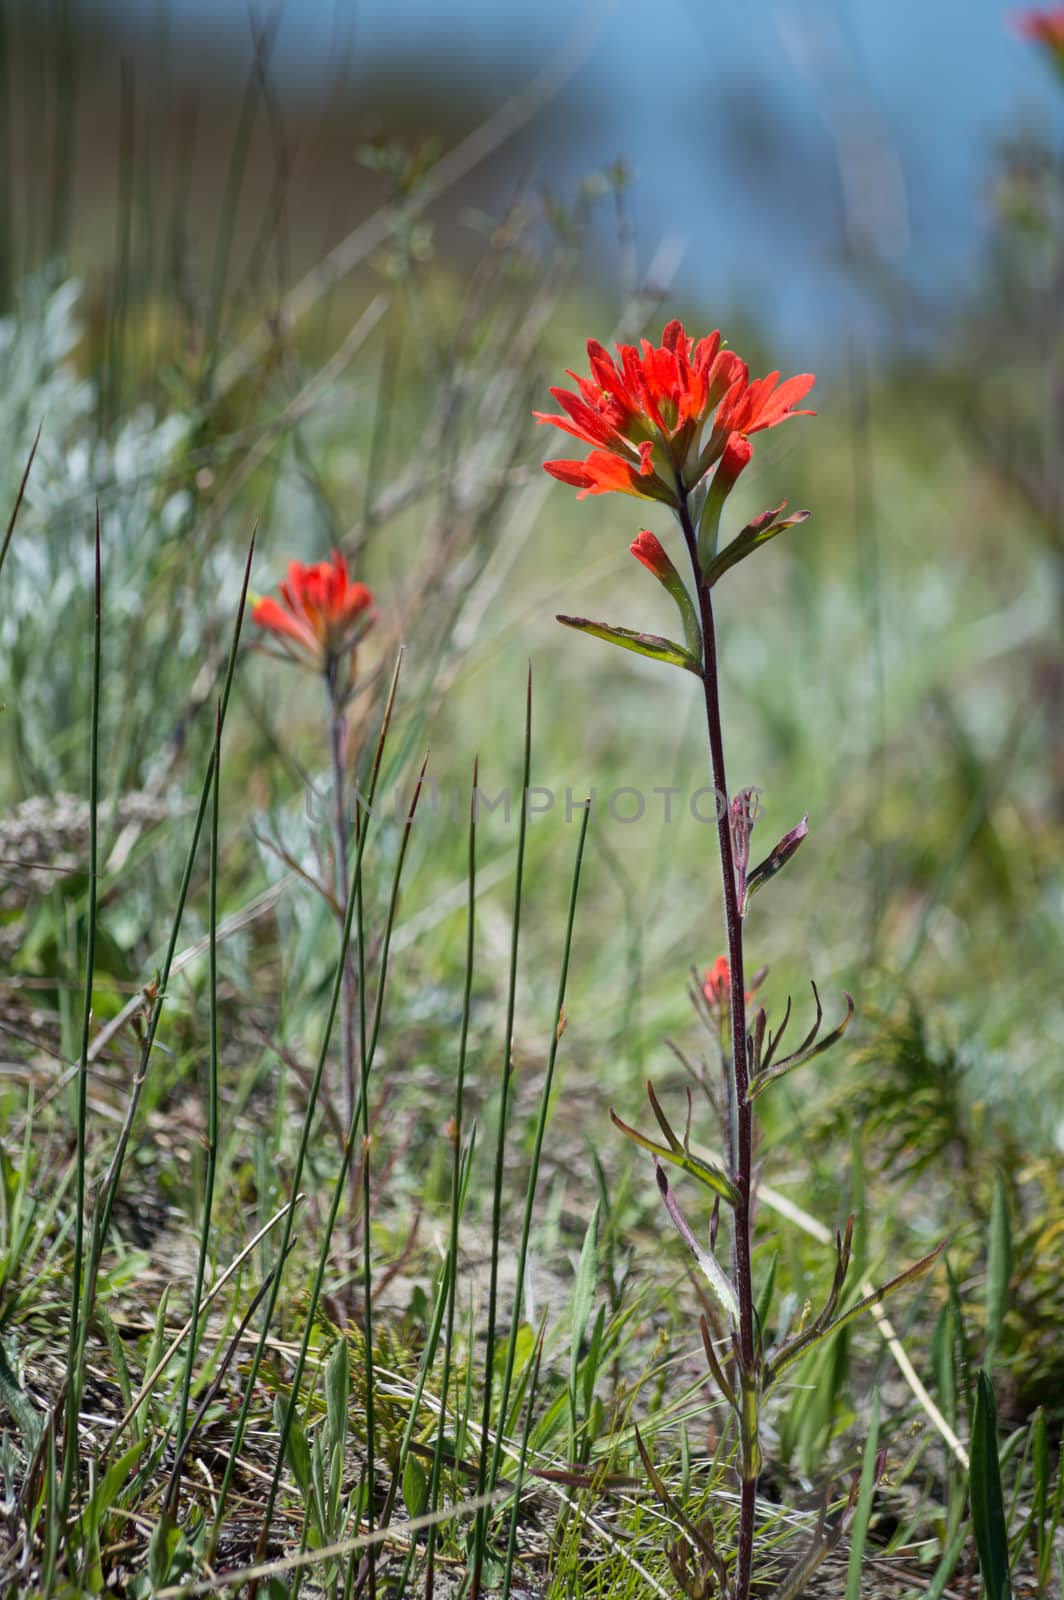 Indian paintbrush flowers by Lake Huron by Sublimage